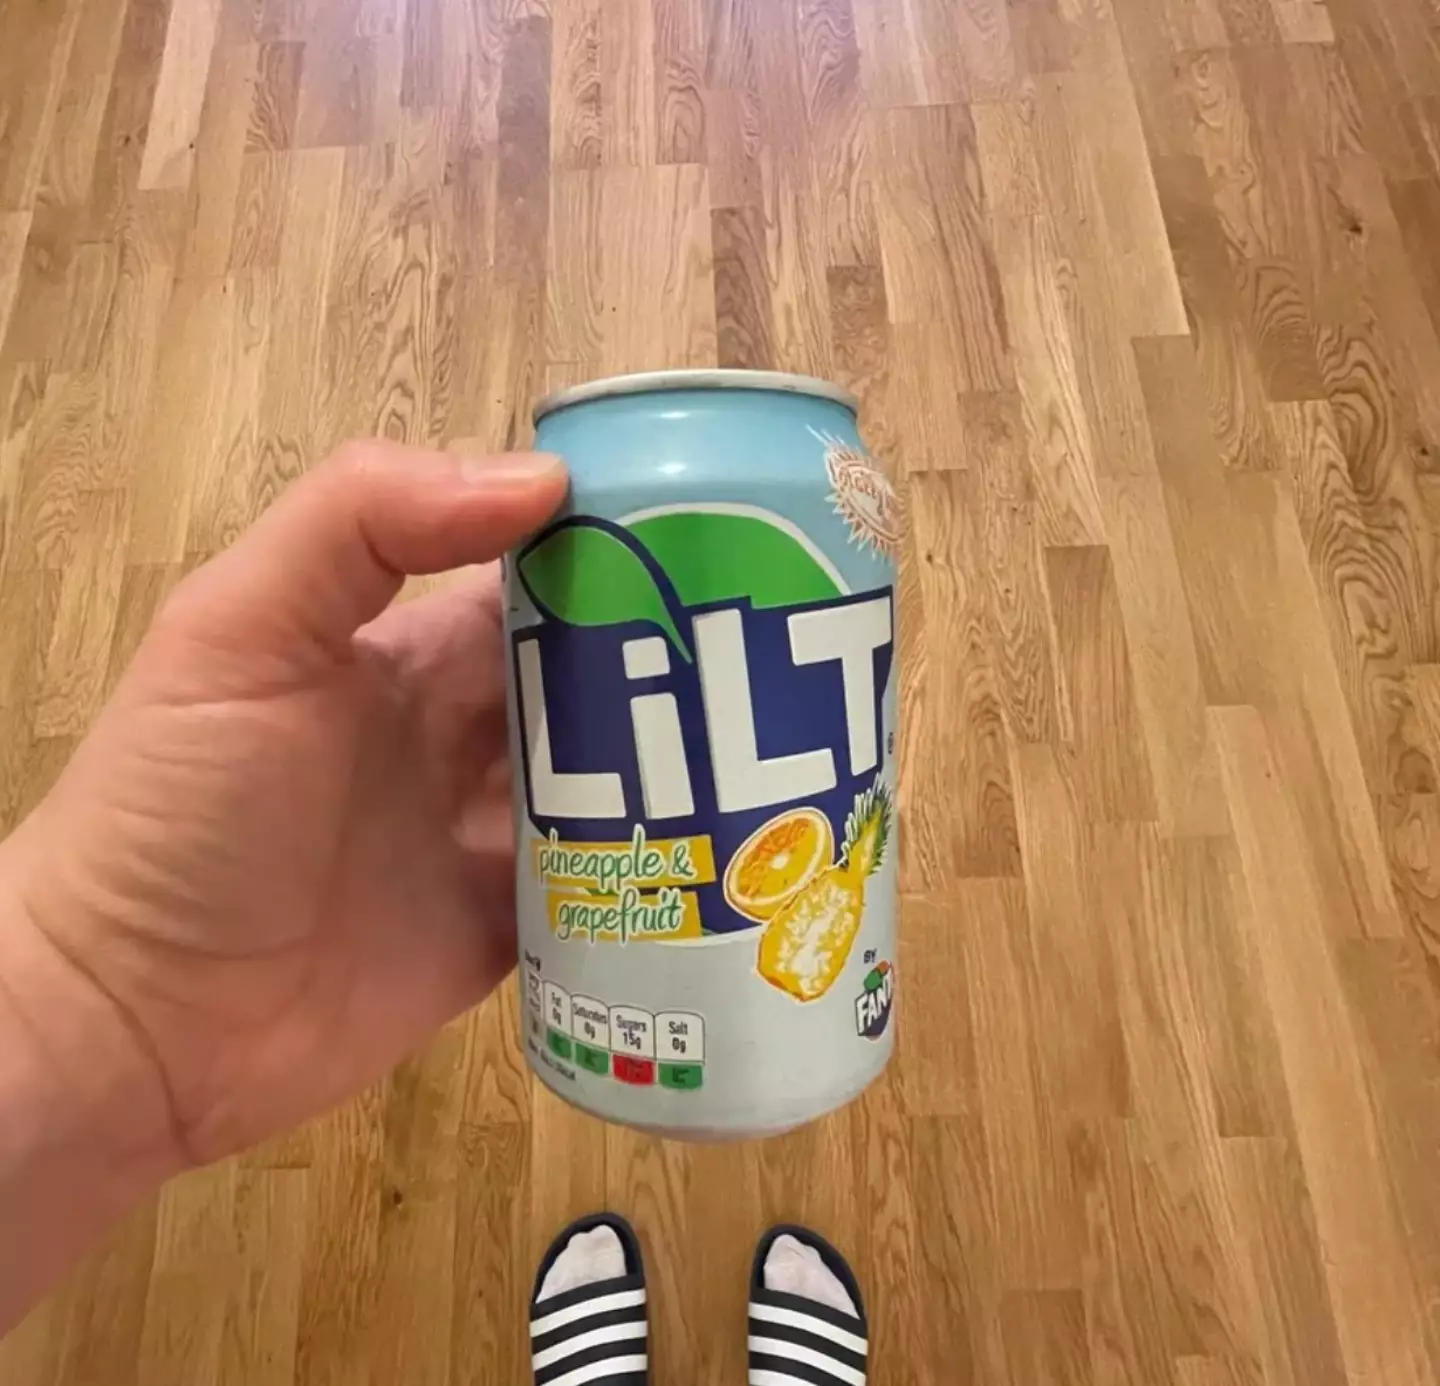 The Fanta logo was present on the old Lilt branding all along.